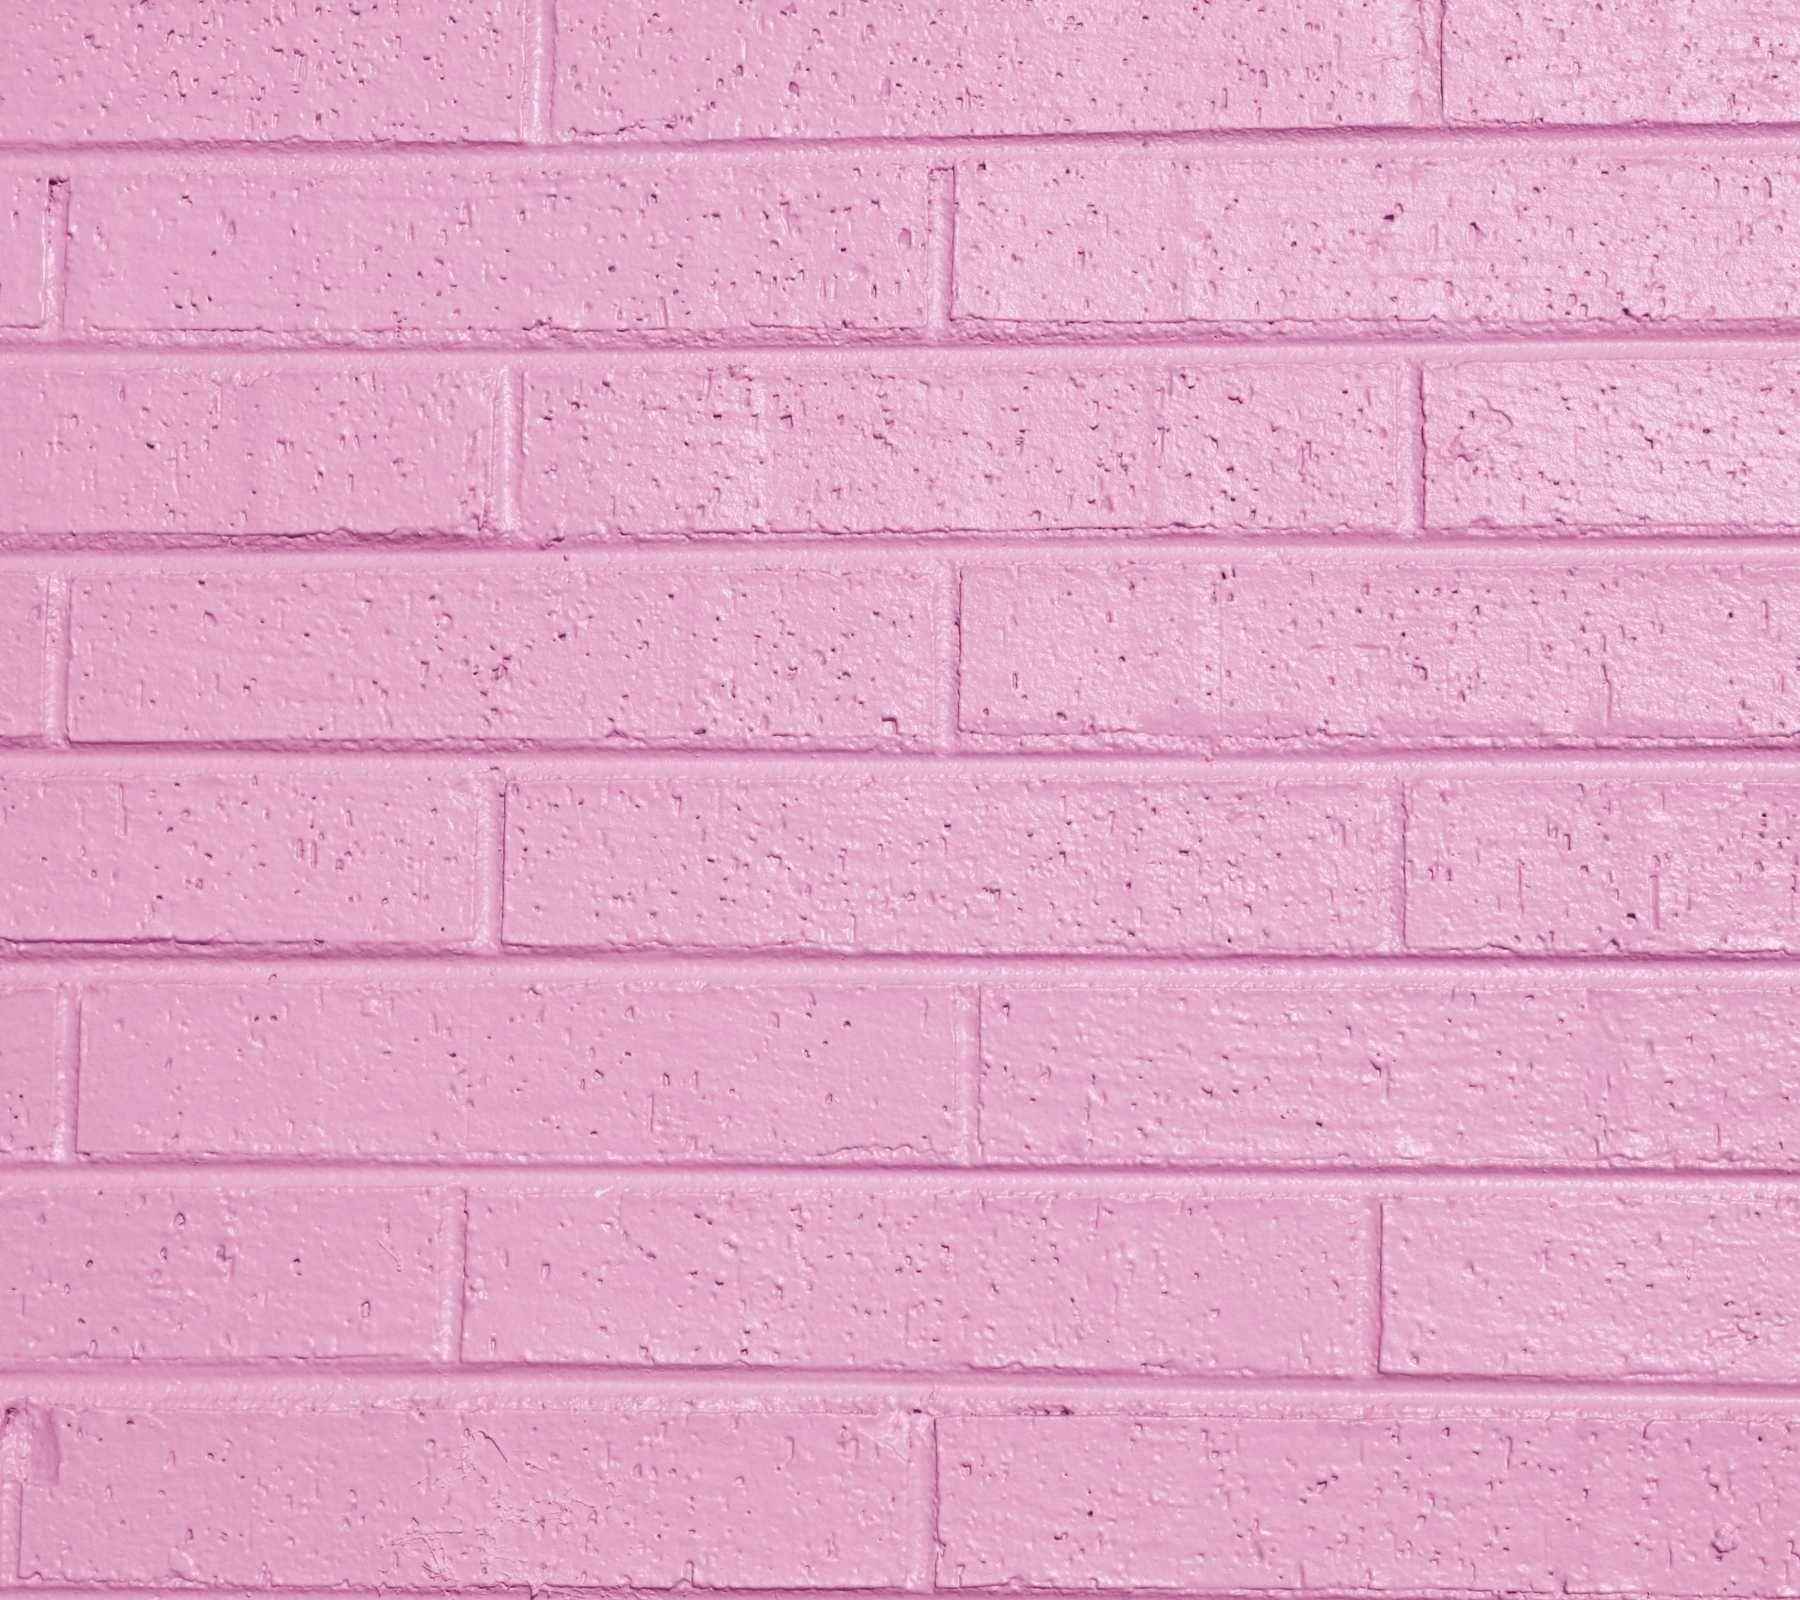 pretty pink backgrounds tumblr